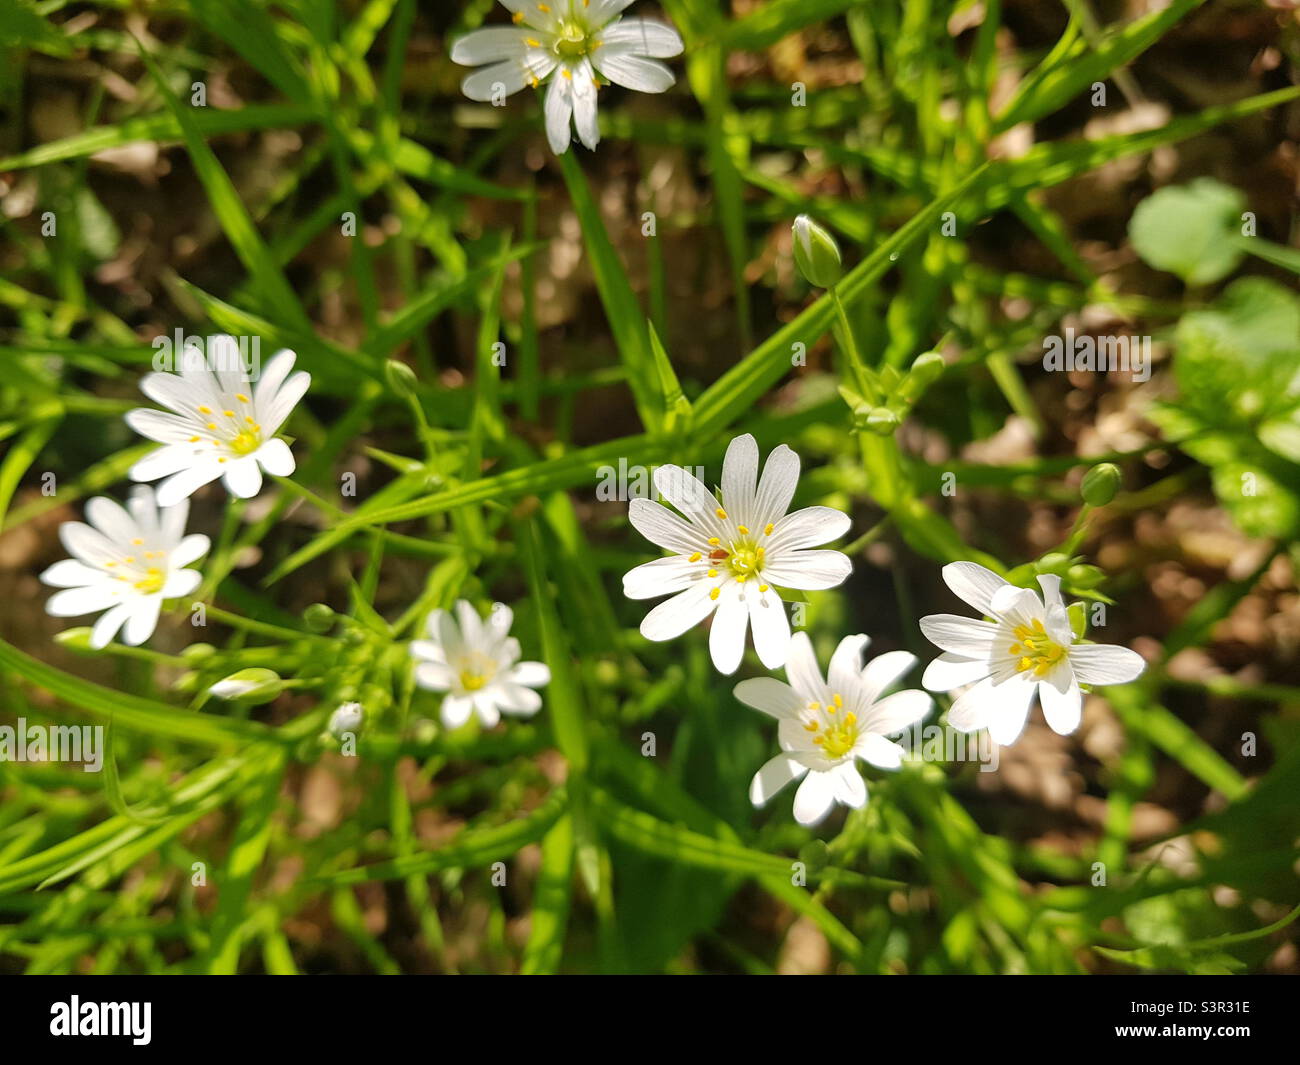 Spring wildflowers stellaria palustris in the forest in Sunny weather. Stellaria palustris reach for the sun Stock Photo